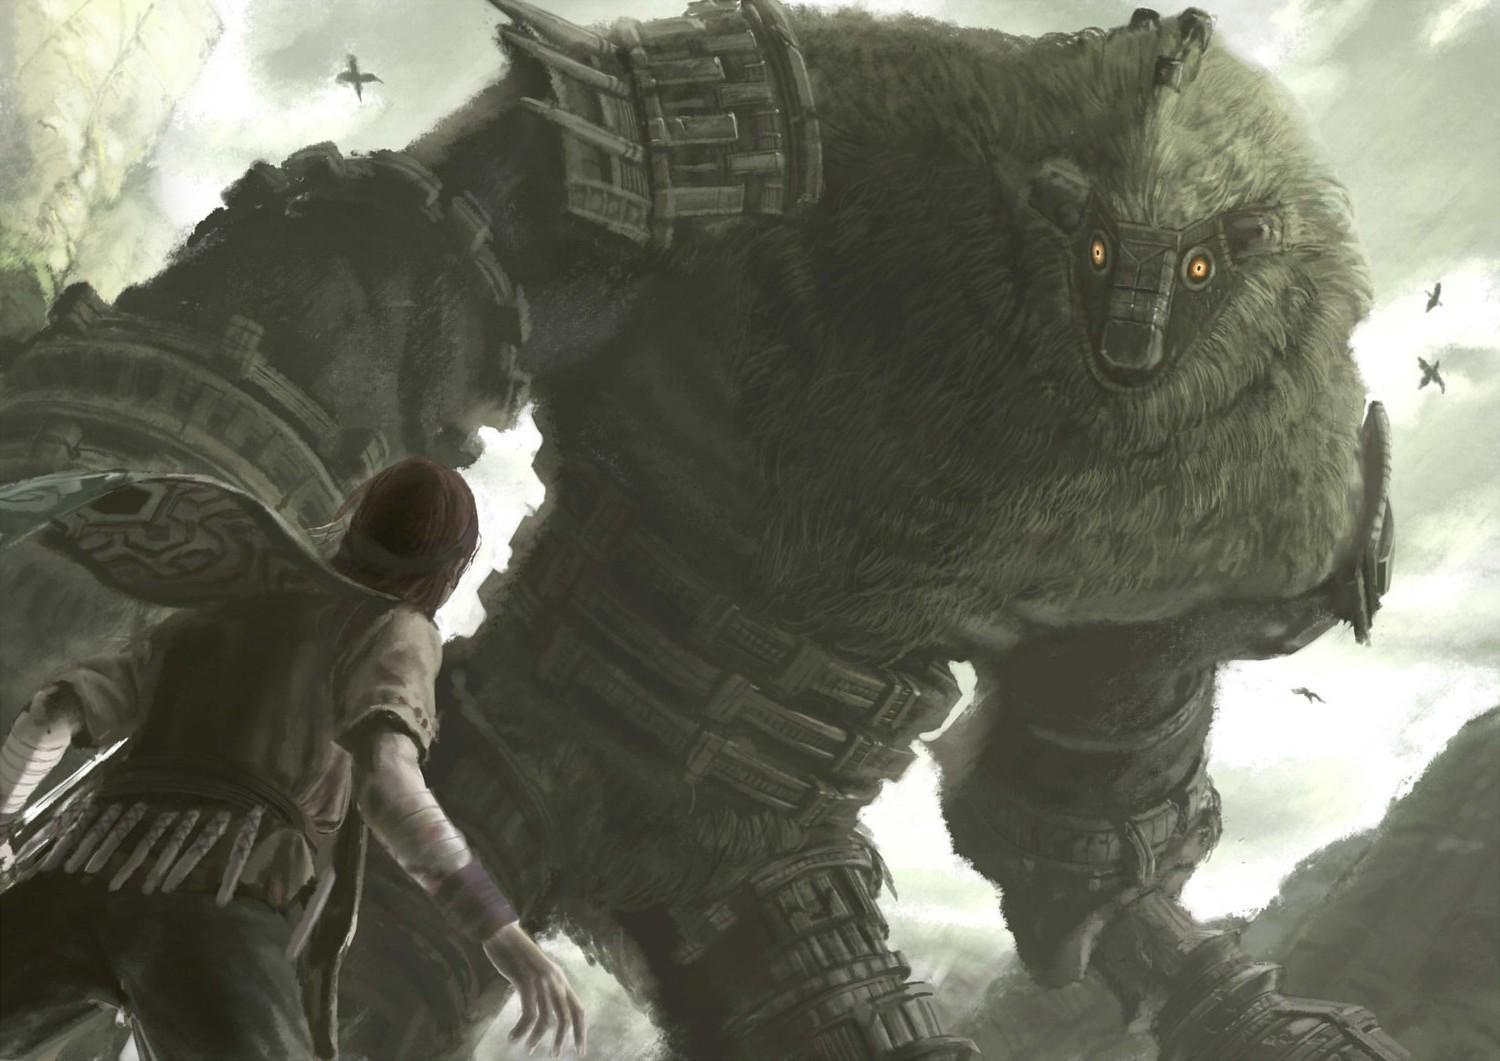 HD wallpaper, Shadow Of The Colossus Wander Video Games Colossus Creature Fantasy Art